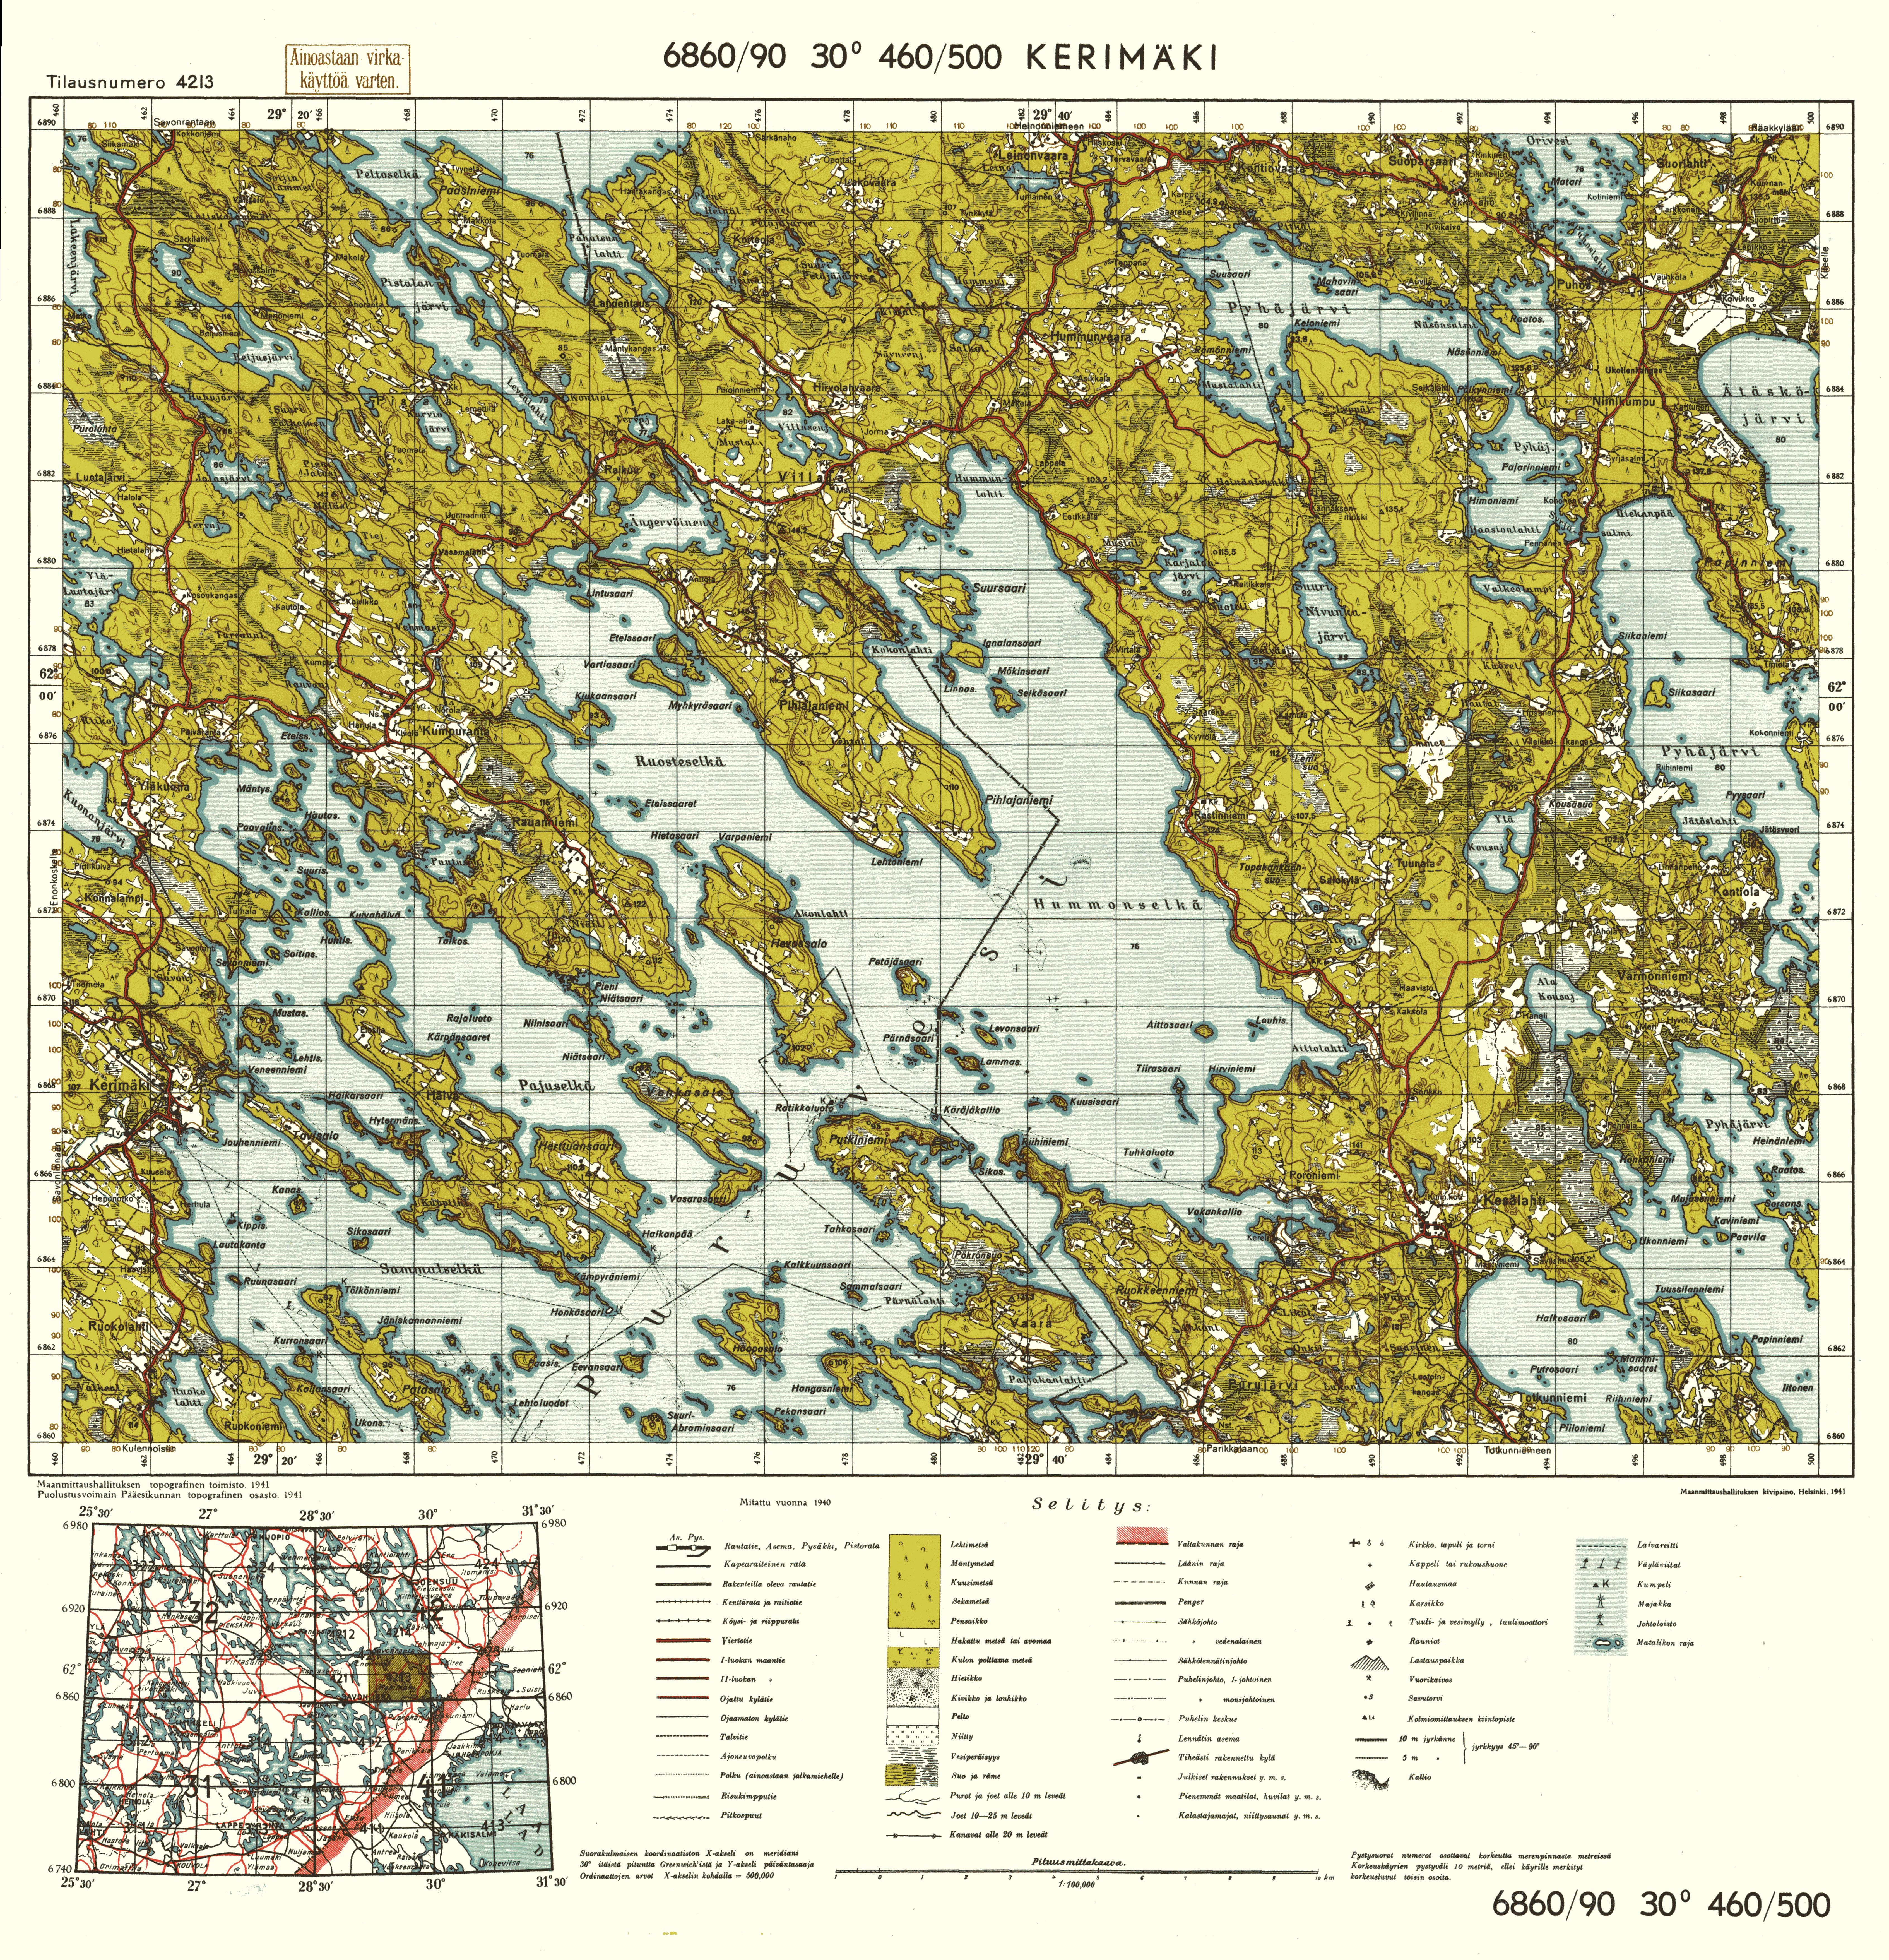 Kerimäki. Topografikartta 4213. Topographic map from 1941. Use the zooming tool to explore in higher level of detail. Obtain as a quality print or high resolution image